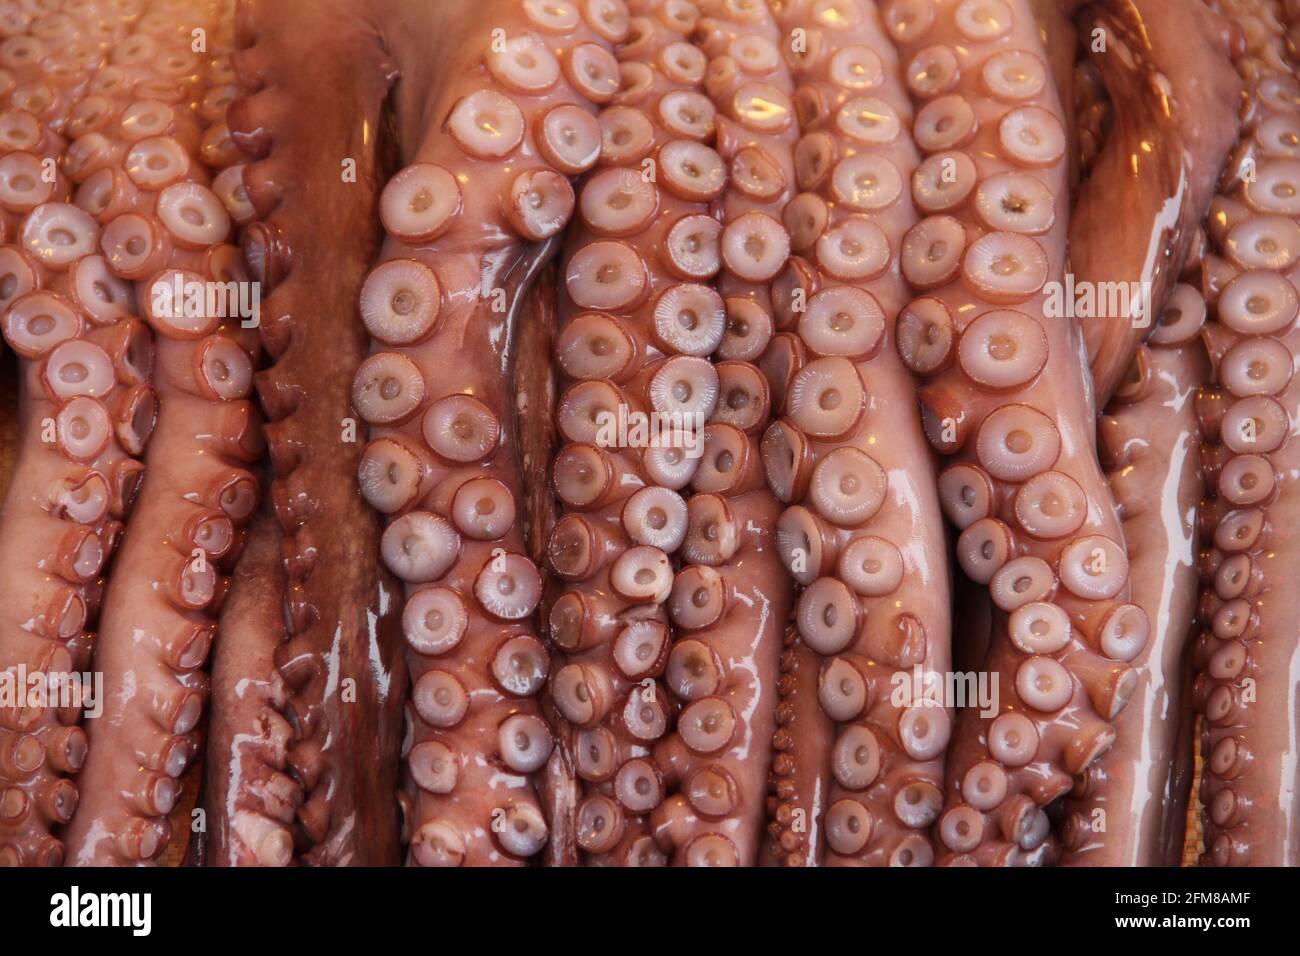 Octopus arms and suckers hang on display at a seafood market in Busan, South Korea Stock Photo